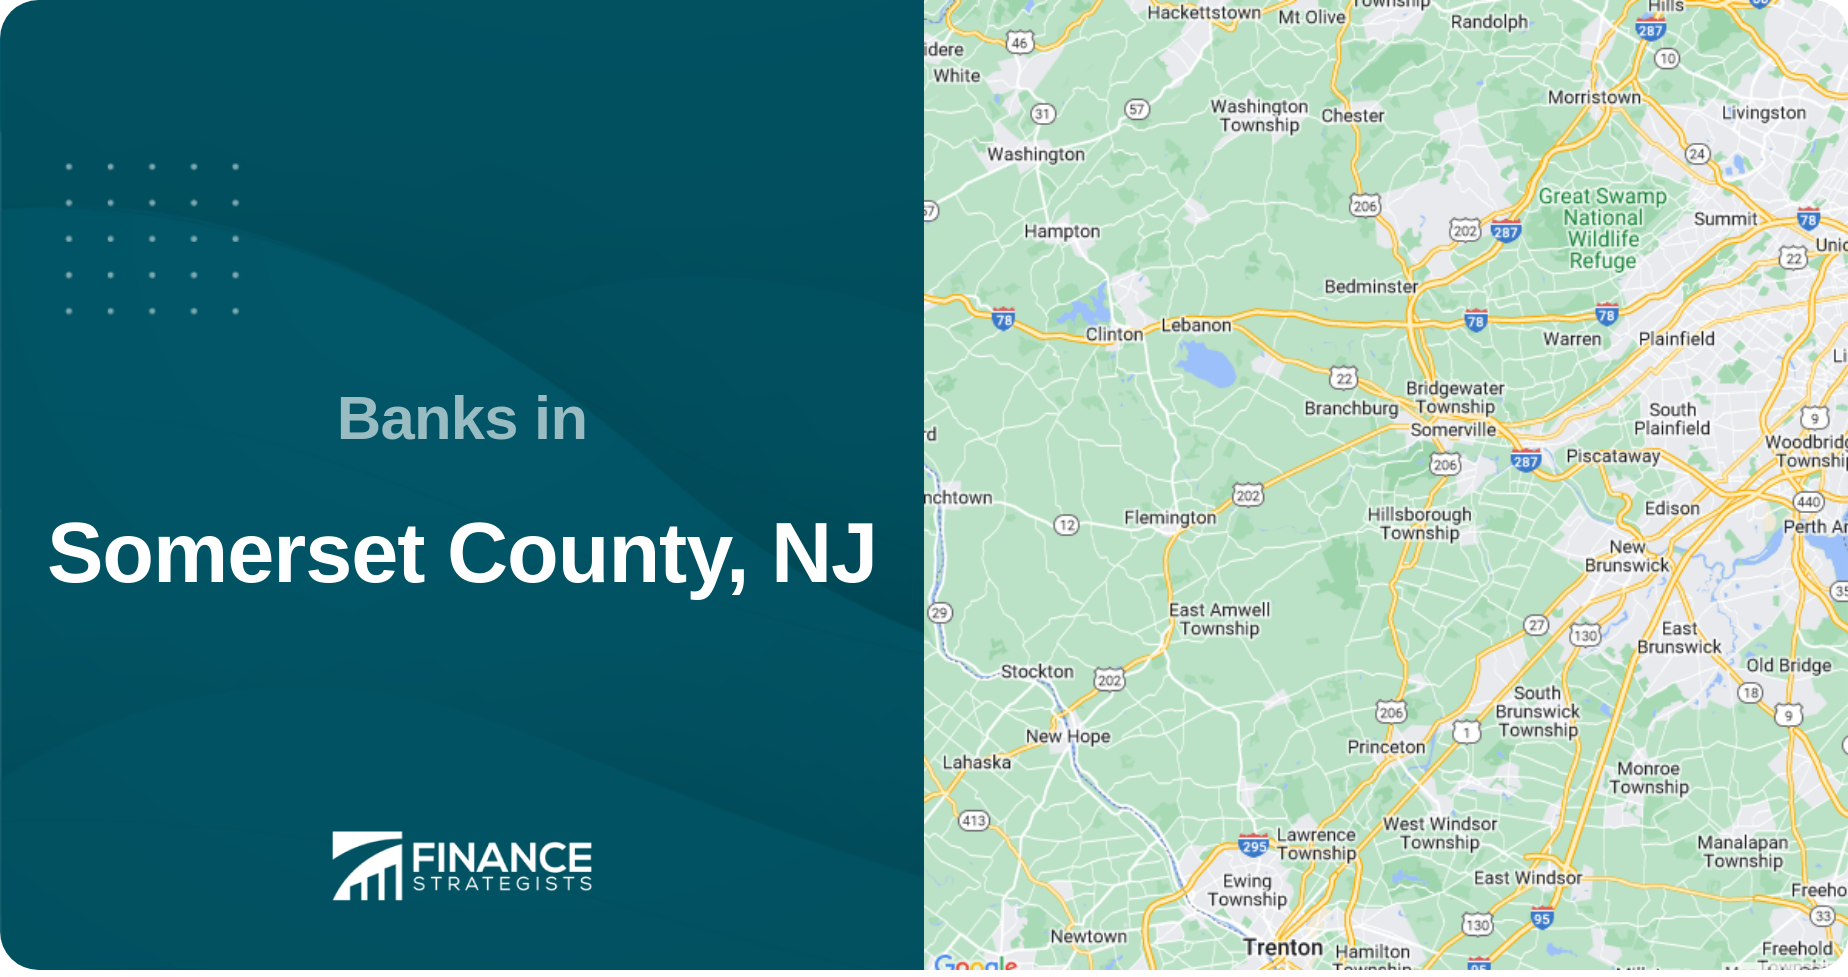 Banks in Somerset County, NJ